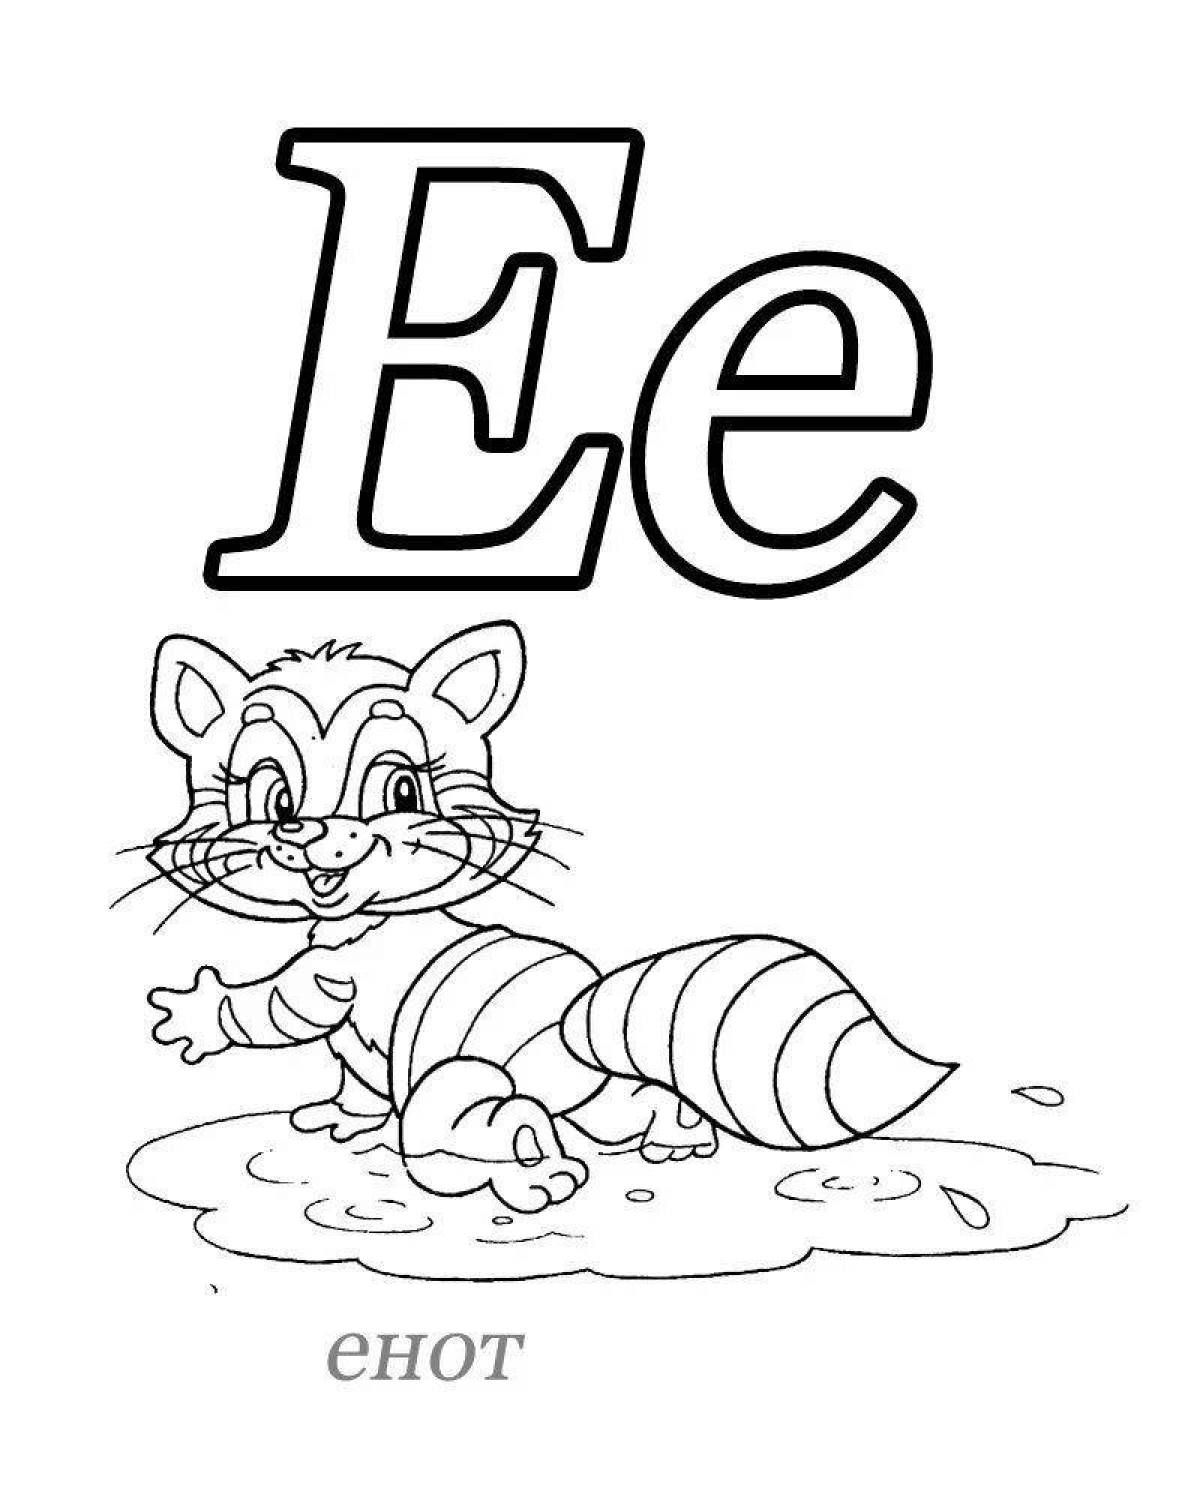 Vibrant alphabet coloring page for kids